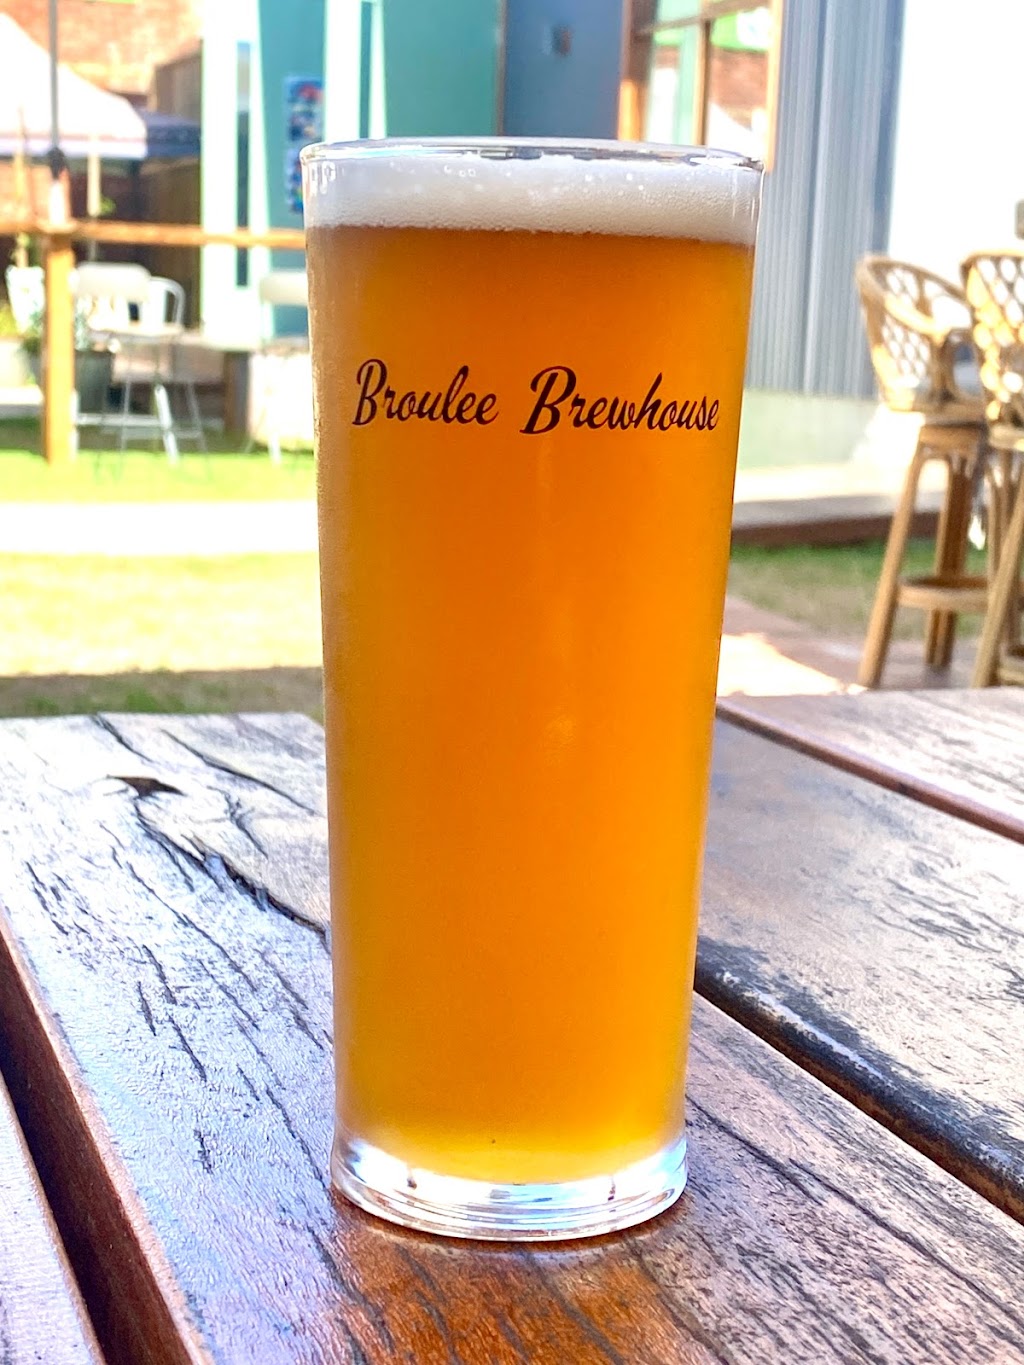 Broulee Brewhouse | bar | 71 Coronation Dr, Broulee NSW 2537, Australia | 0460885763 OR +61 460 885 763